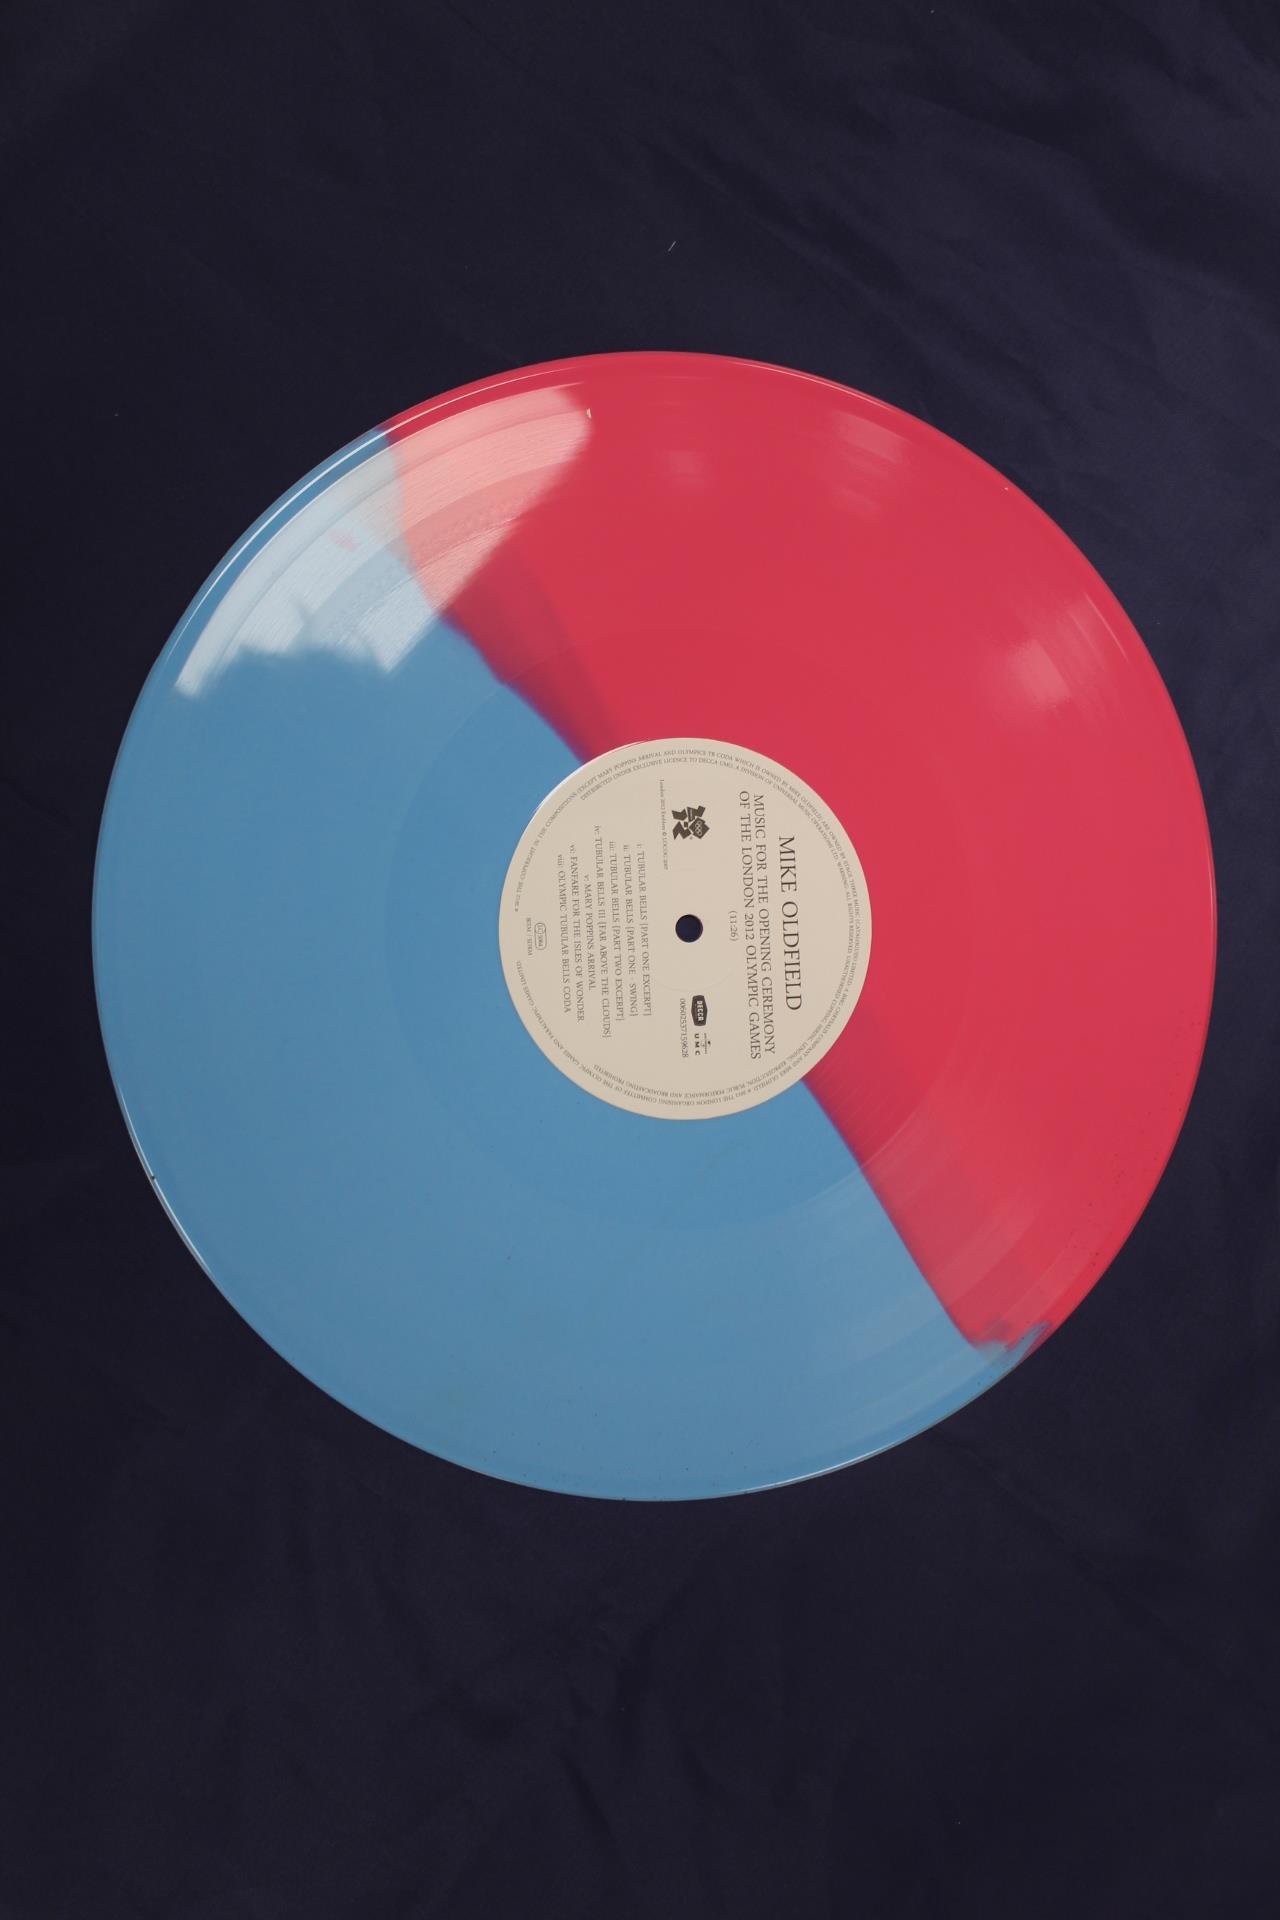 Mike Oldfield LP, London 2012 Olympic Games. Limited edition 482 of 500. Pink and blue vinyl. - Image 2 of 2